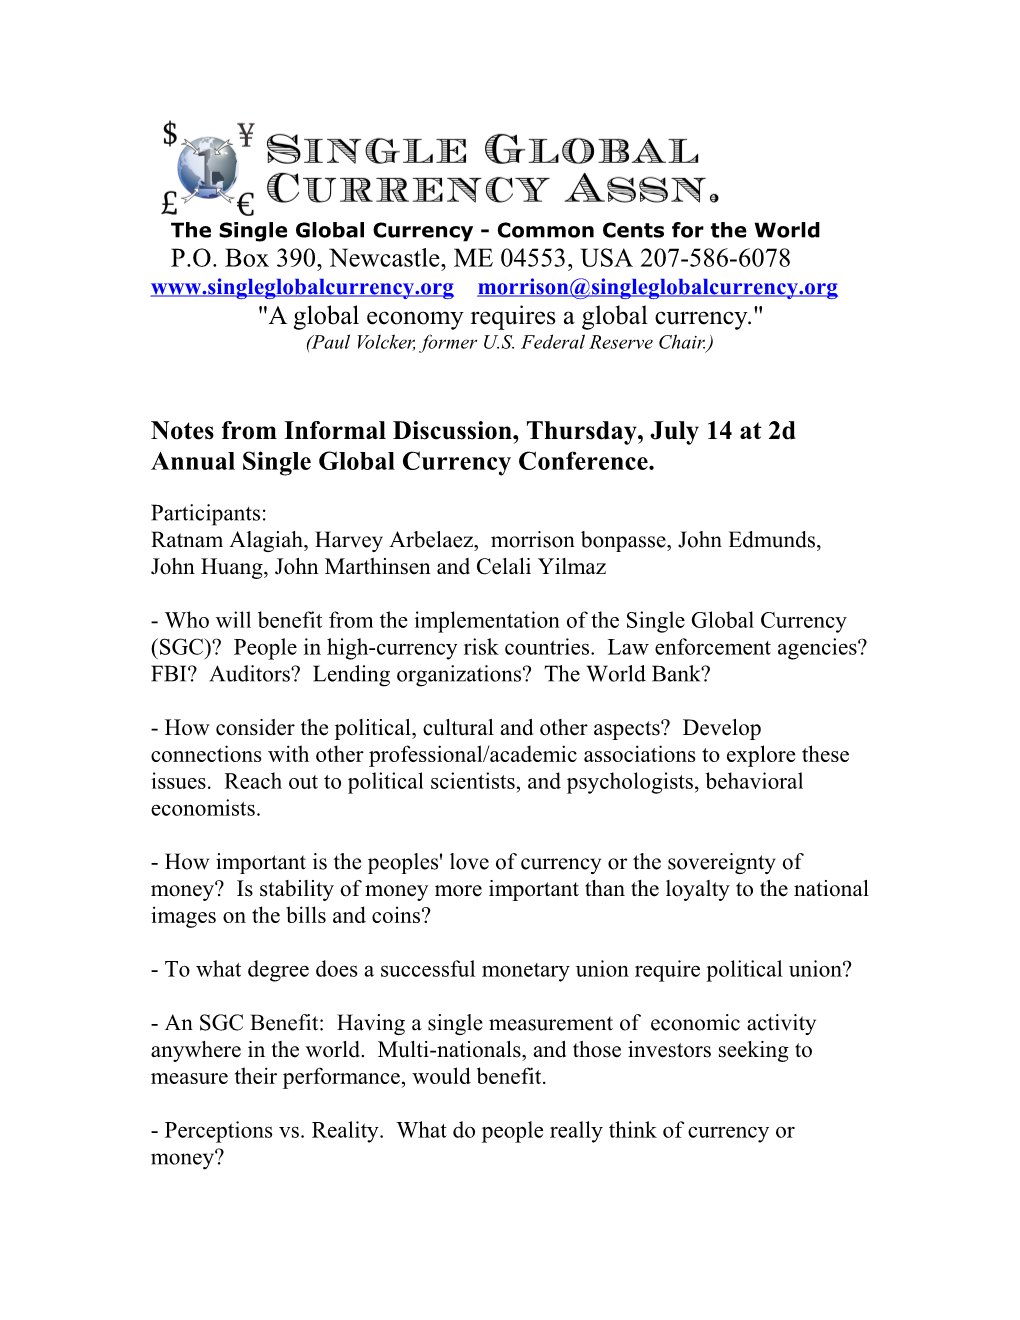 The Single Global Currency - Common Cents for the World